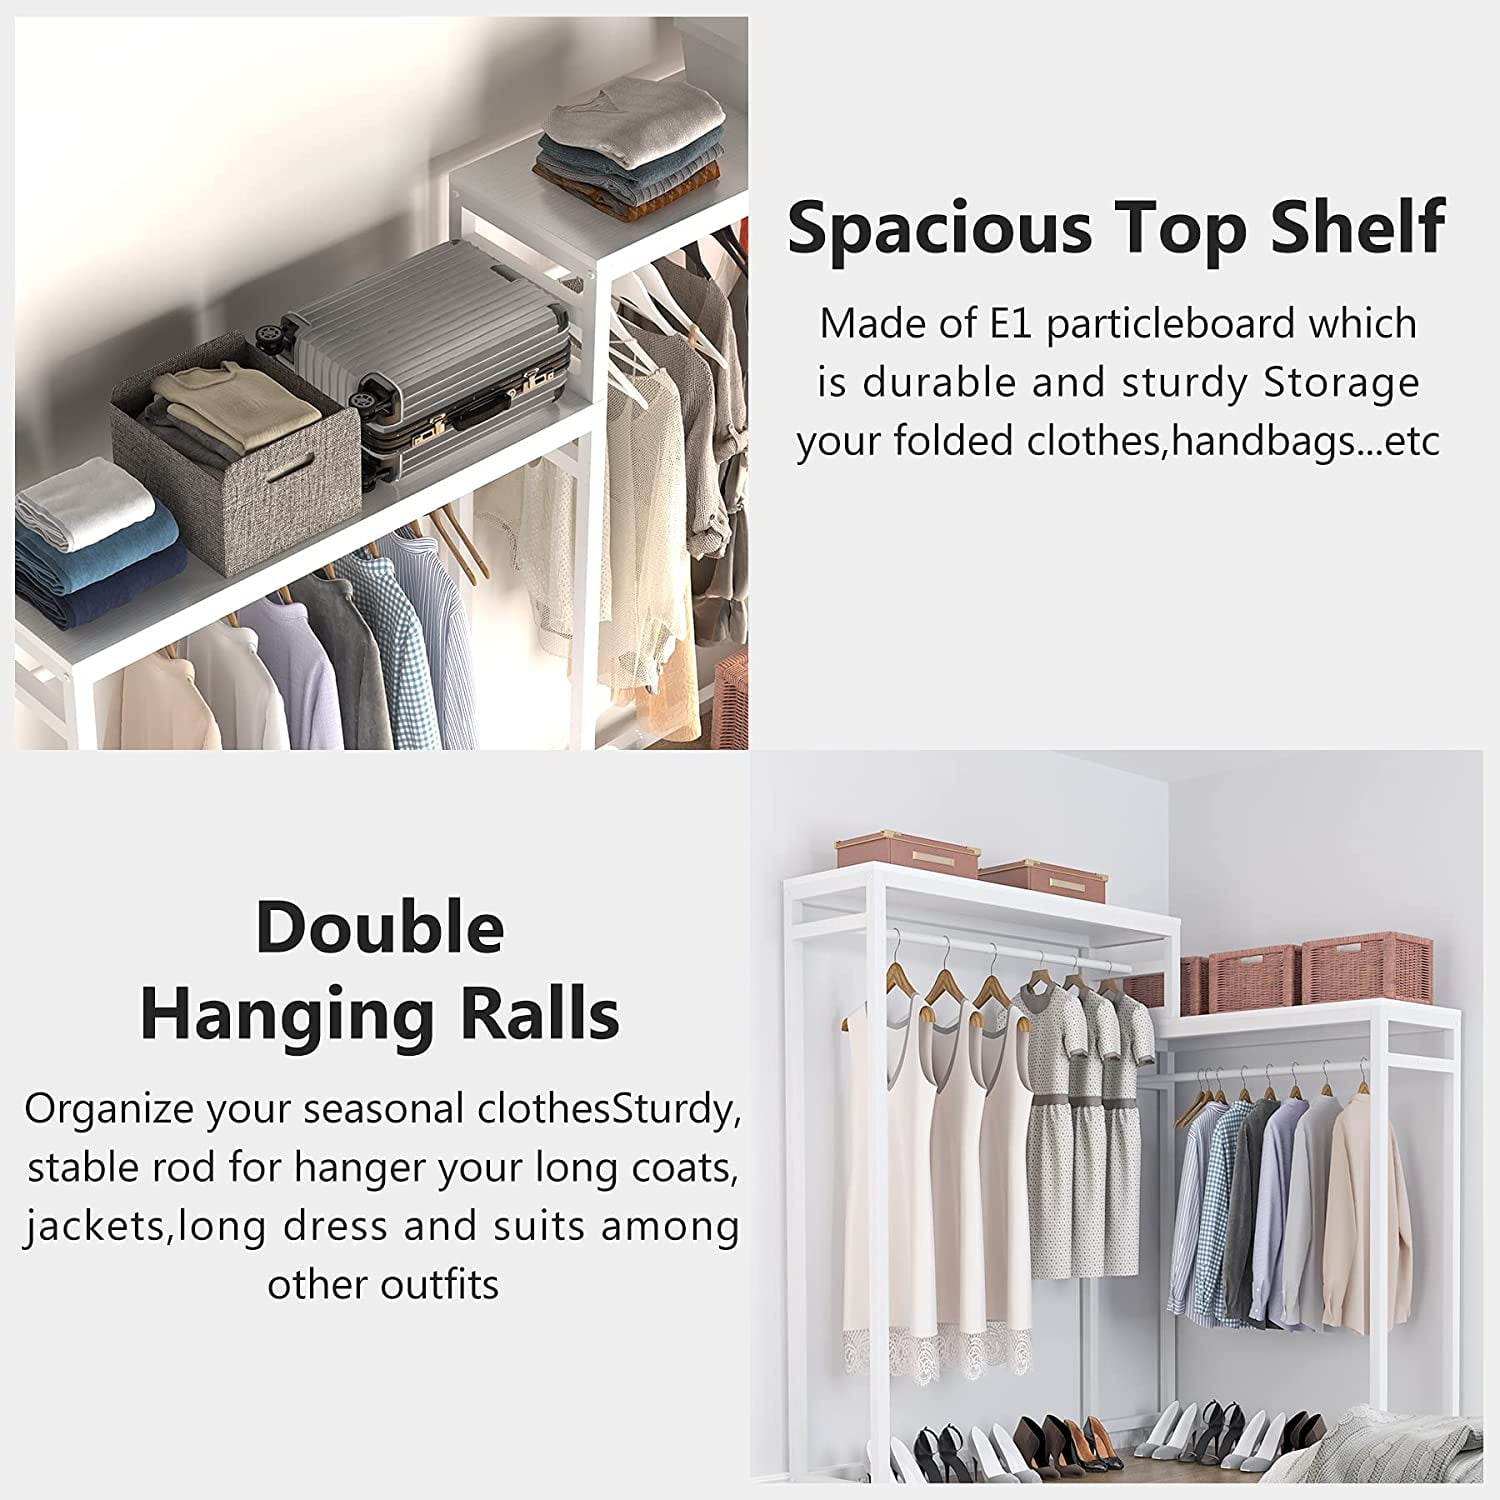 Free Standing Closet Organizer, Clothes Garment Rack with Open